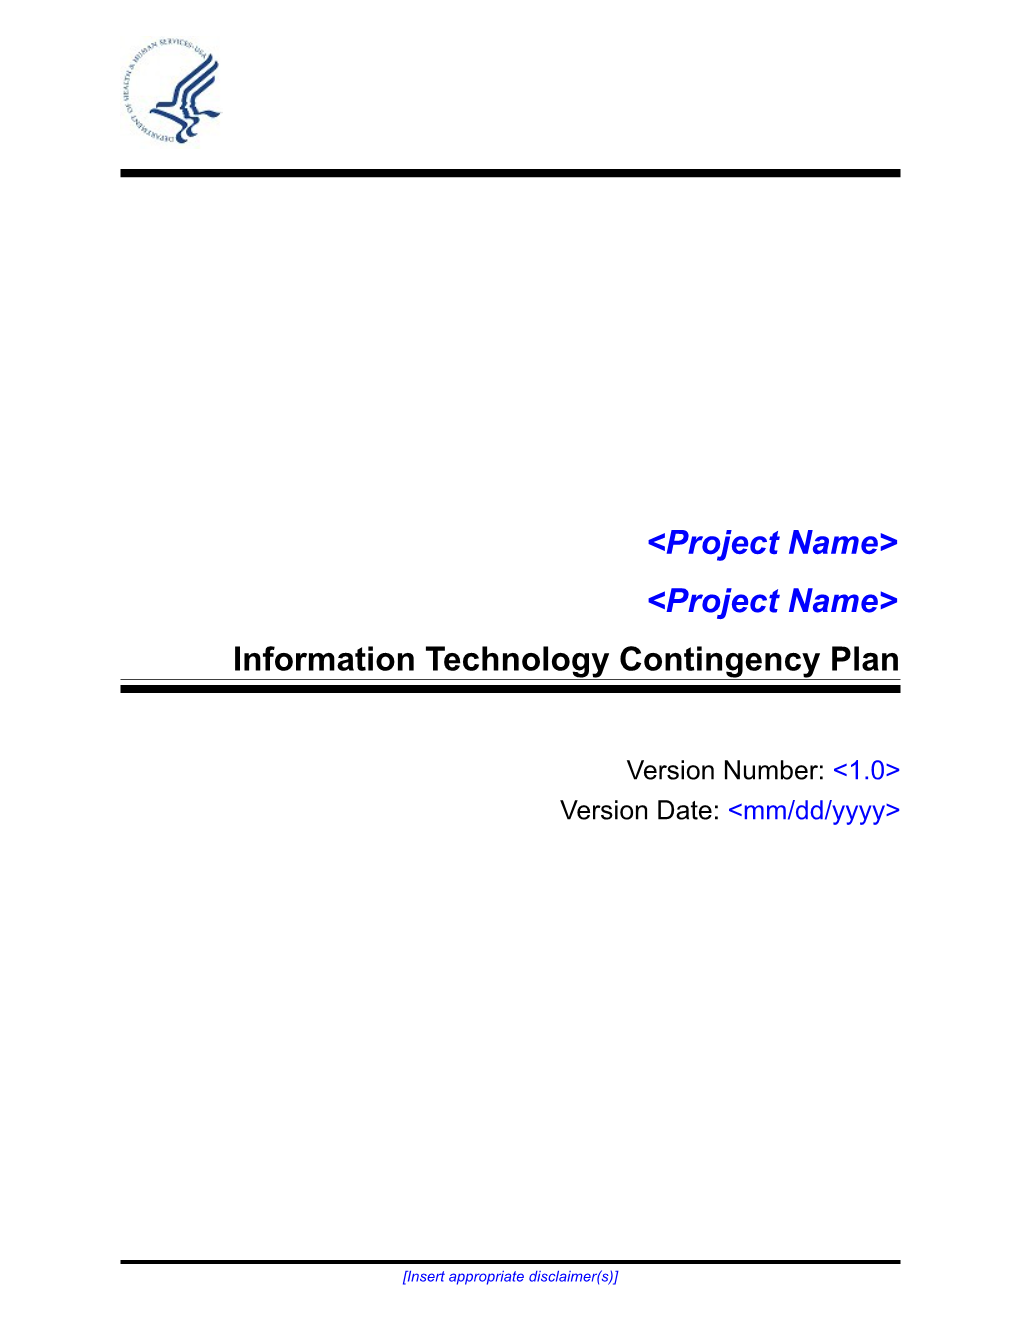 Contingency Plan Template